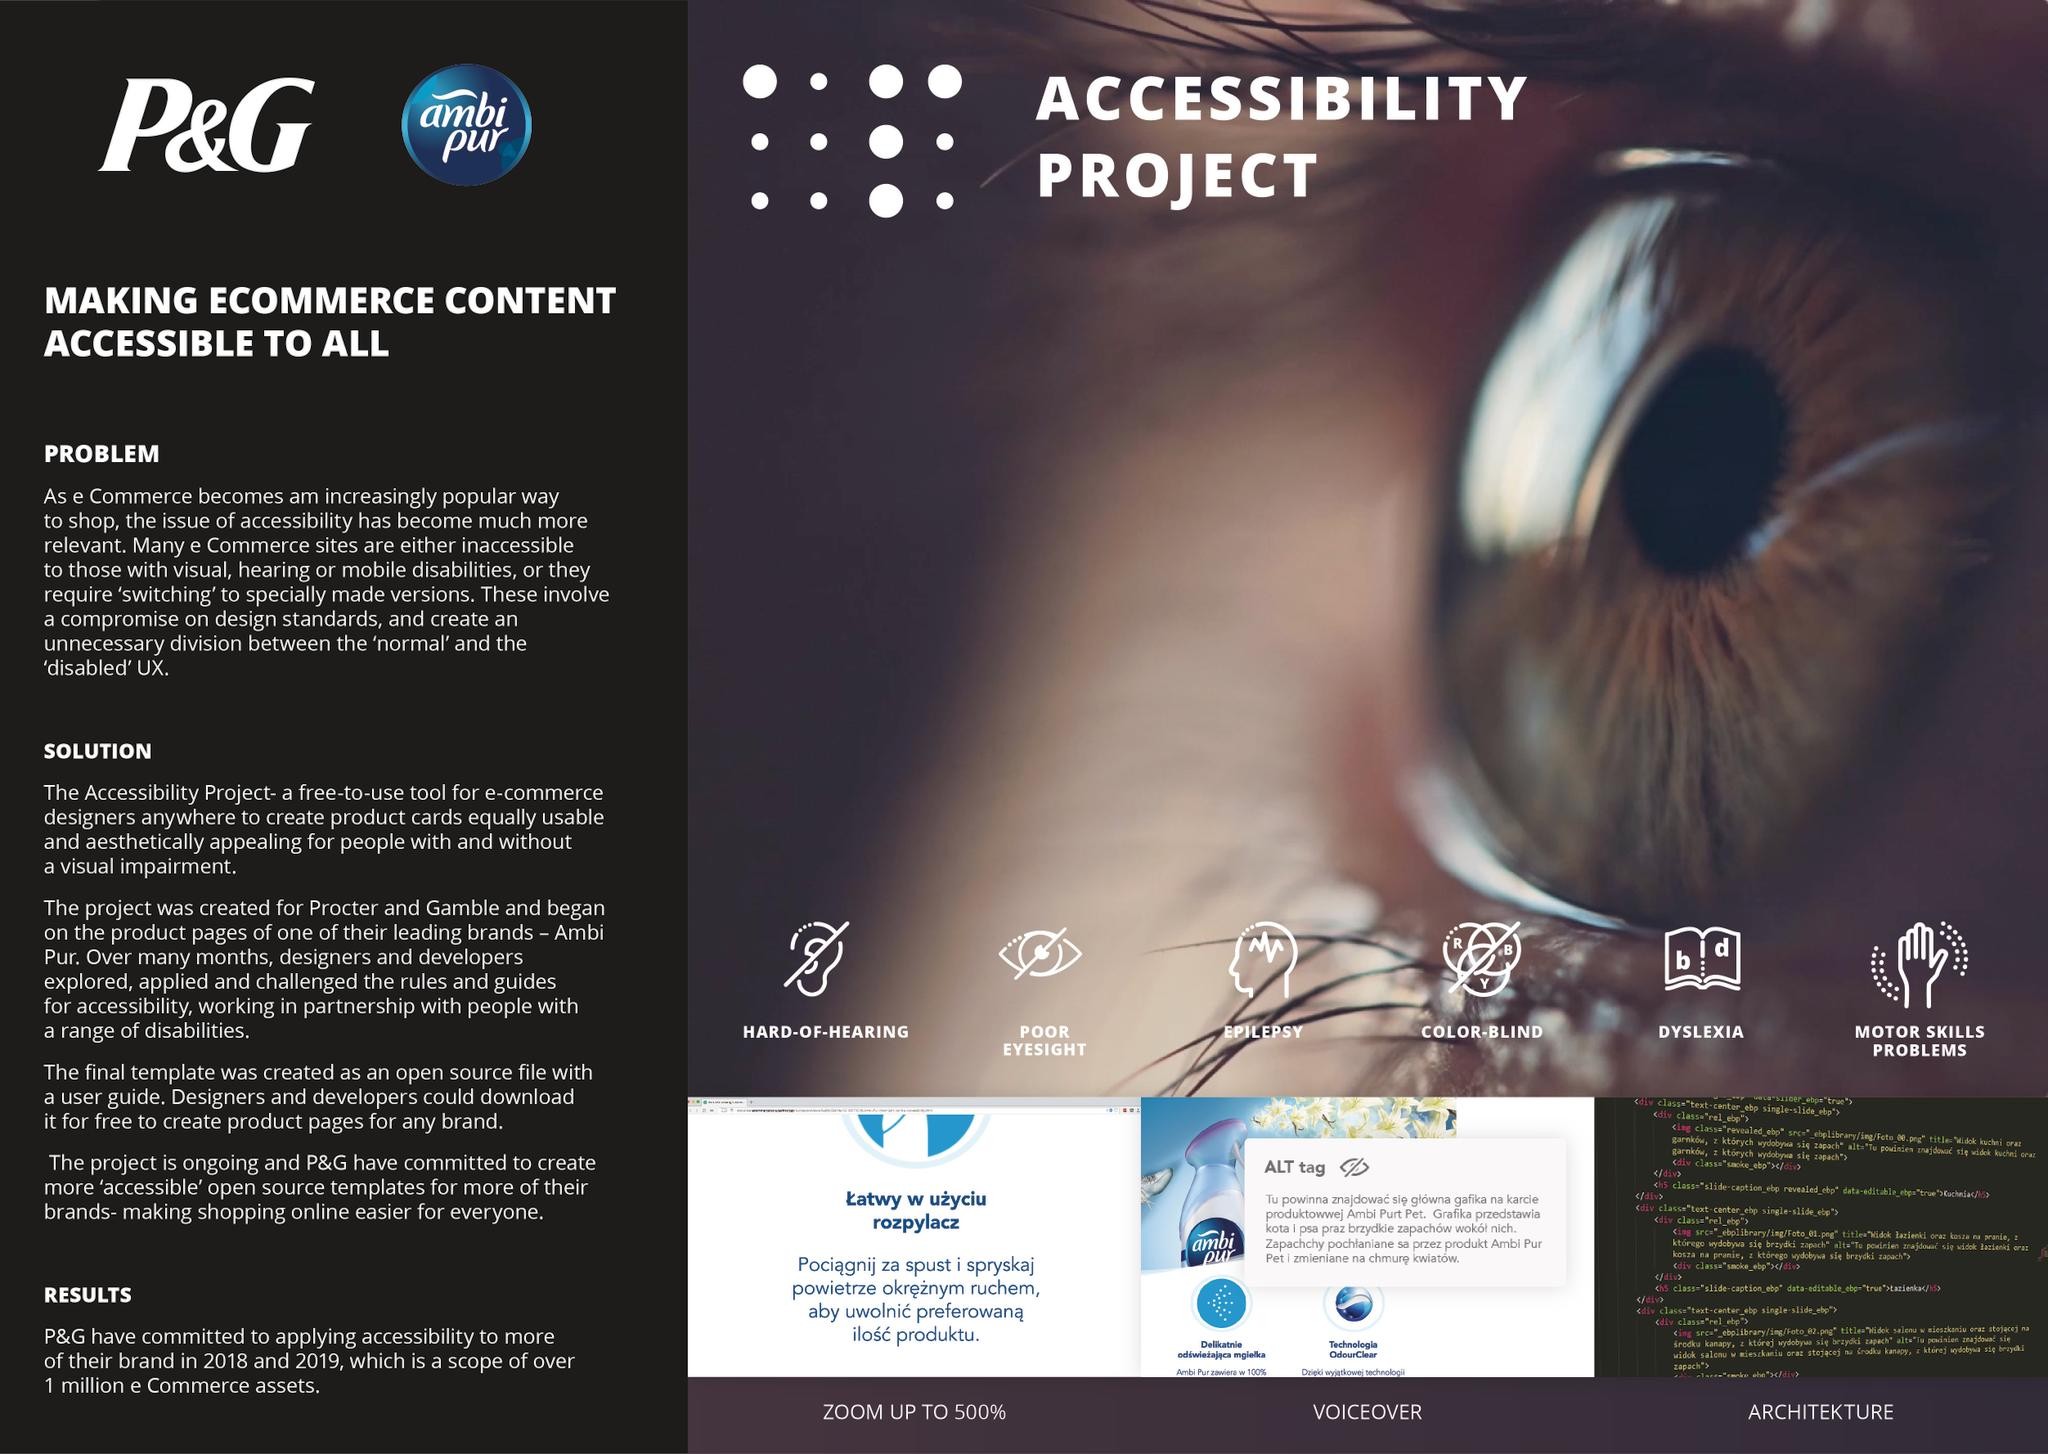 THE ACCESSIBILITY PROJECT